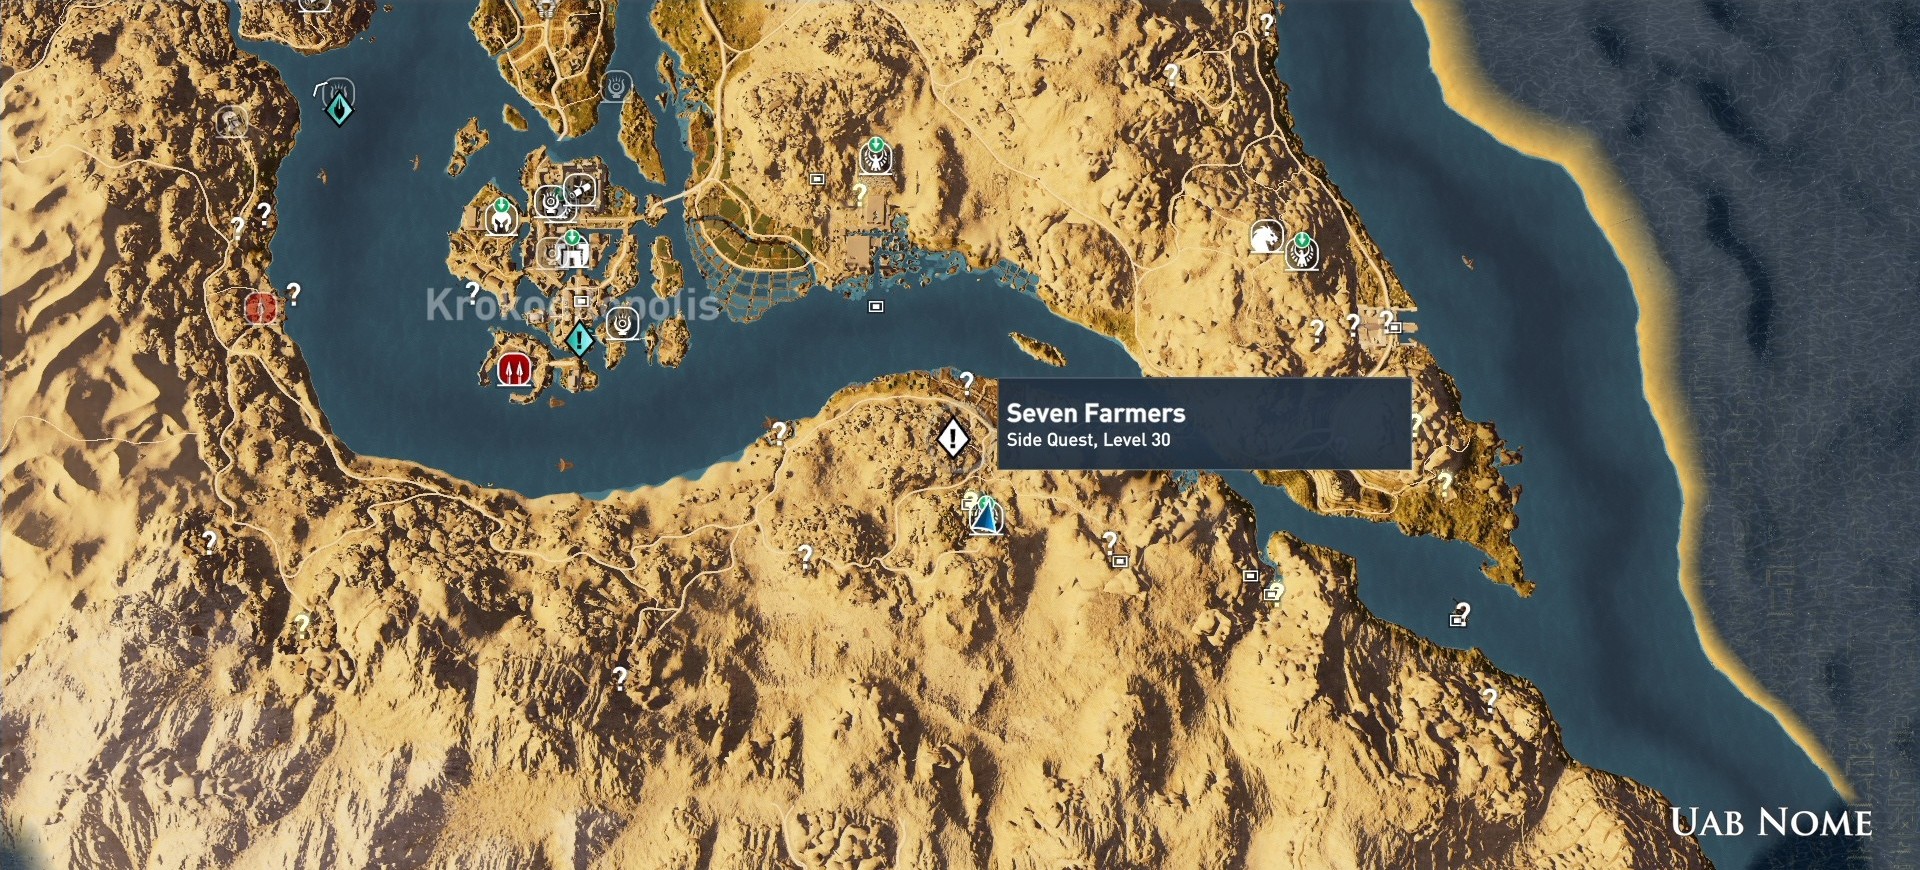 Assassin's Creed Origins - Slasher Trophy & Achievement - Kill 3 enemies  with one hit 